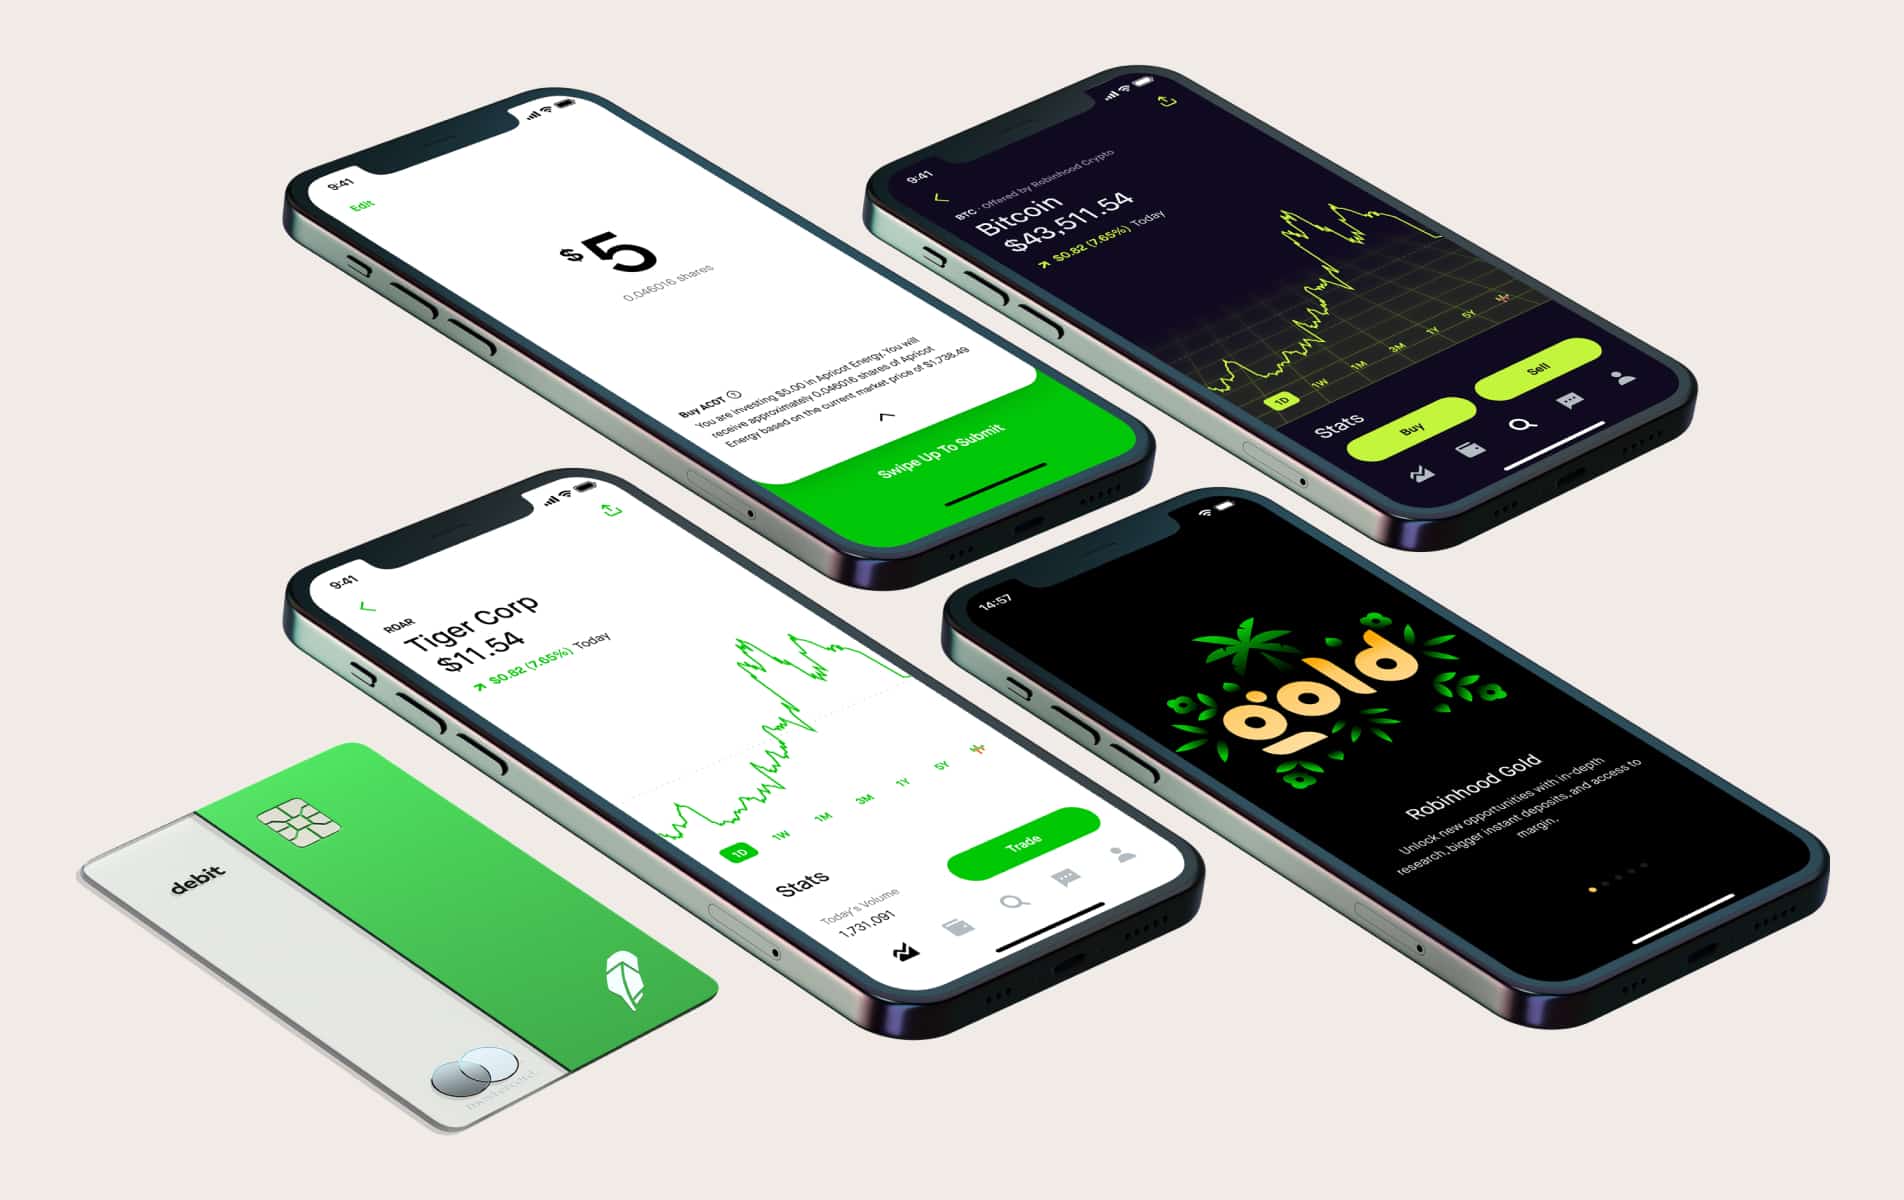 Retail trading app Robinhood makes its Wall Street debut on the